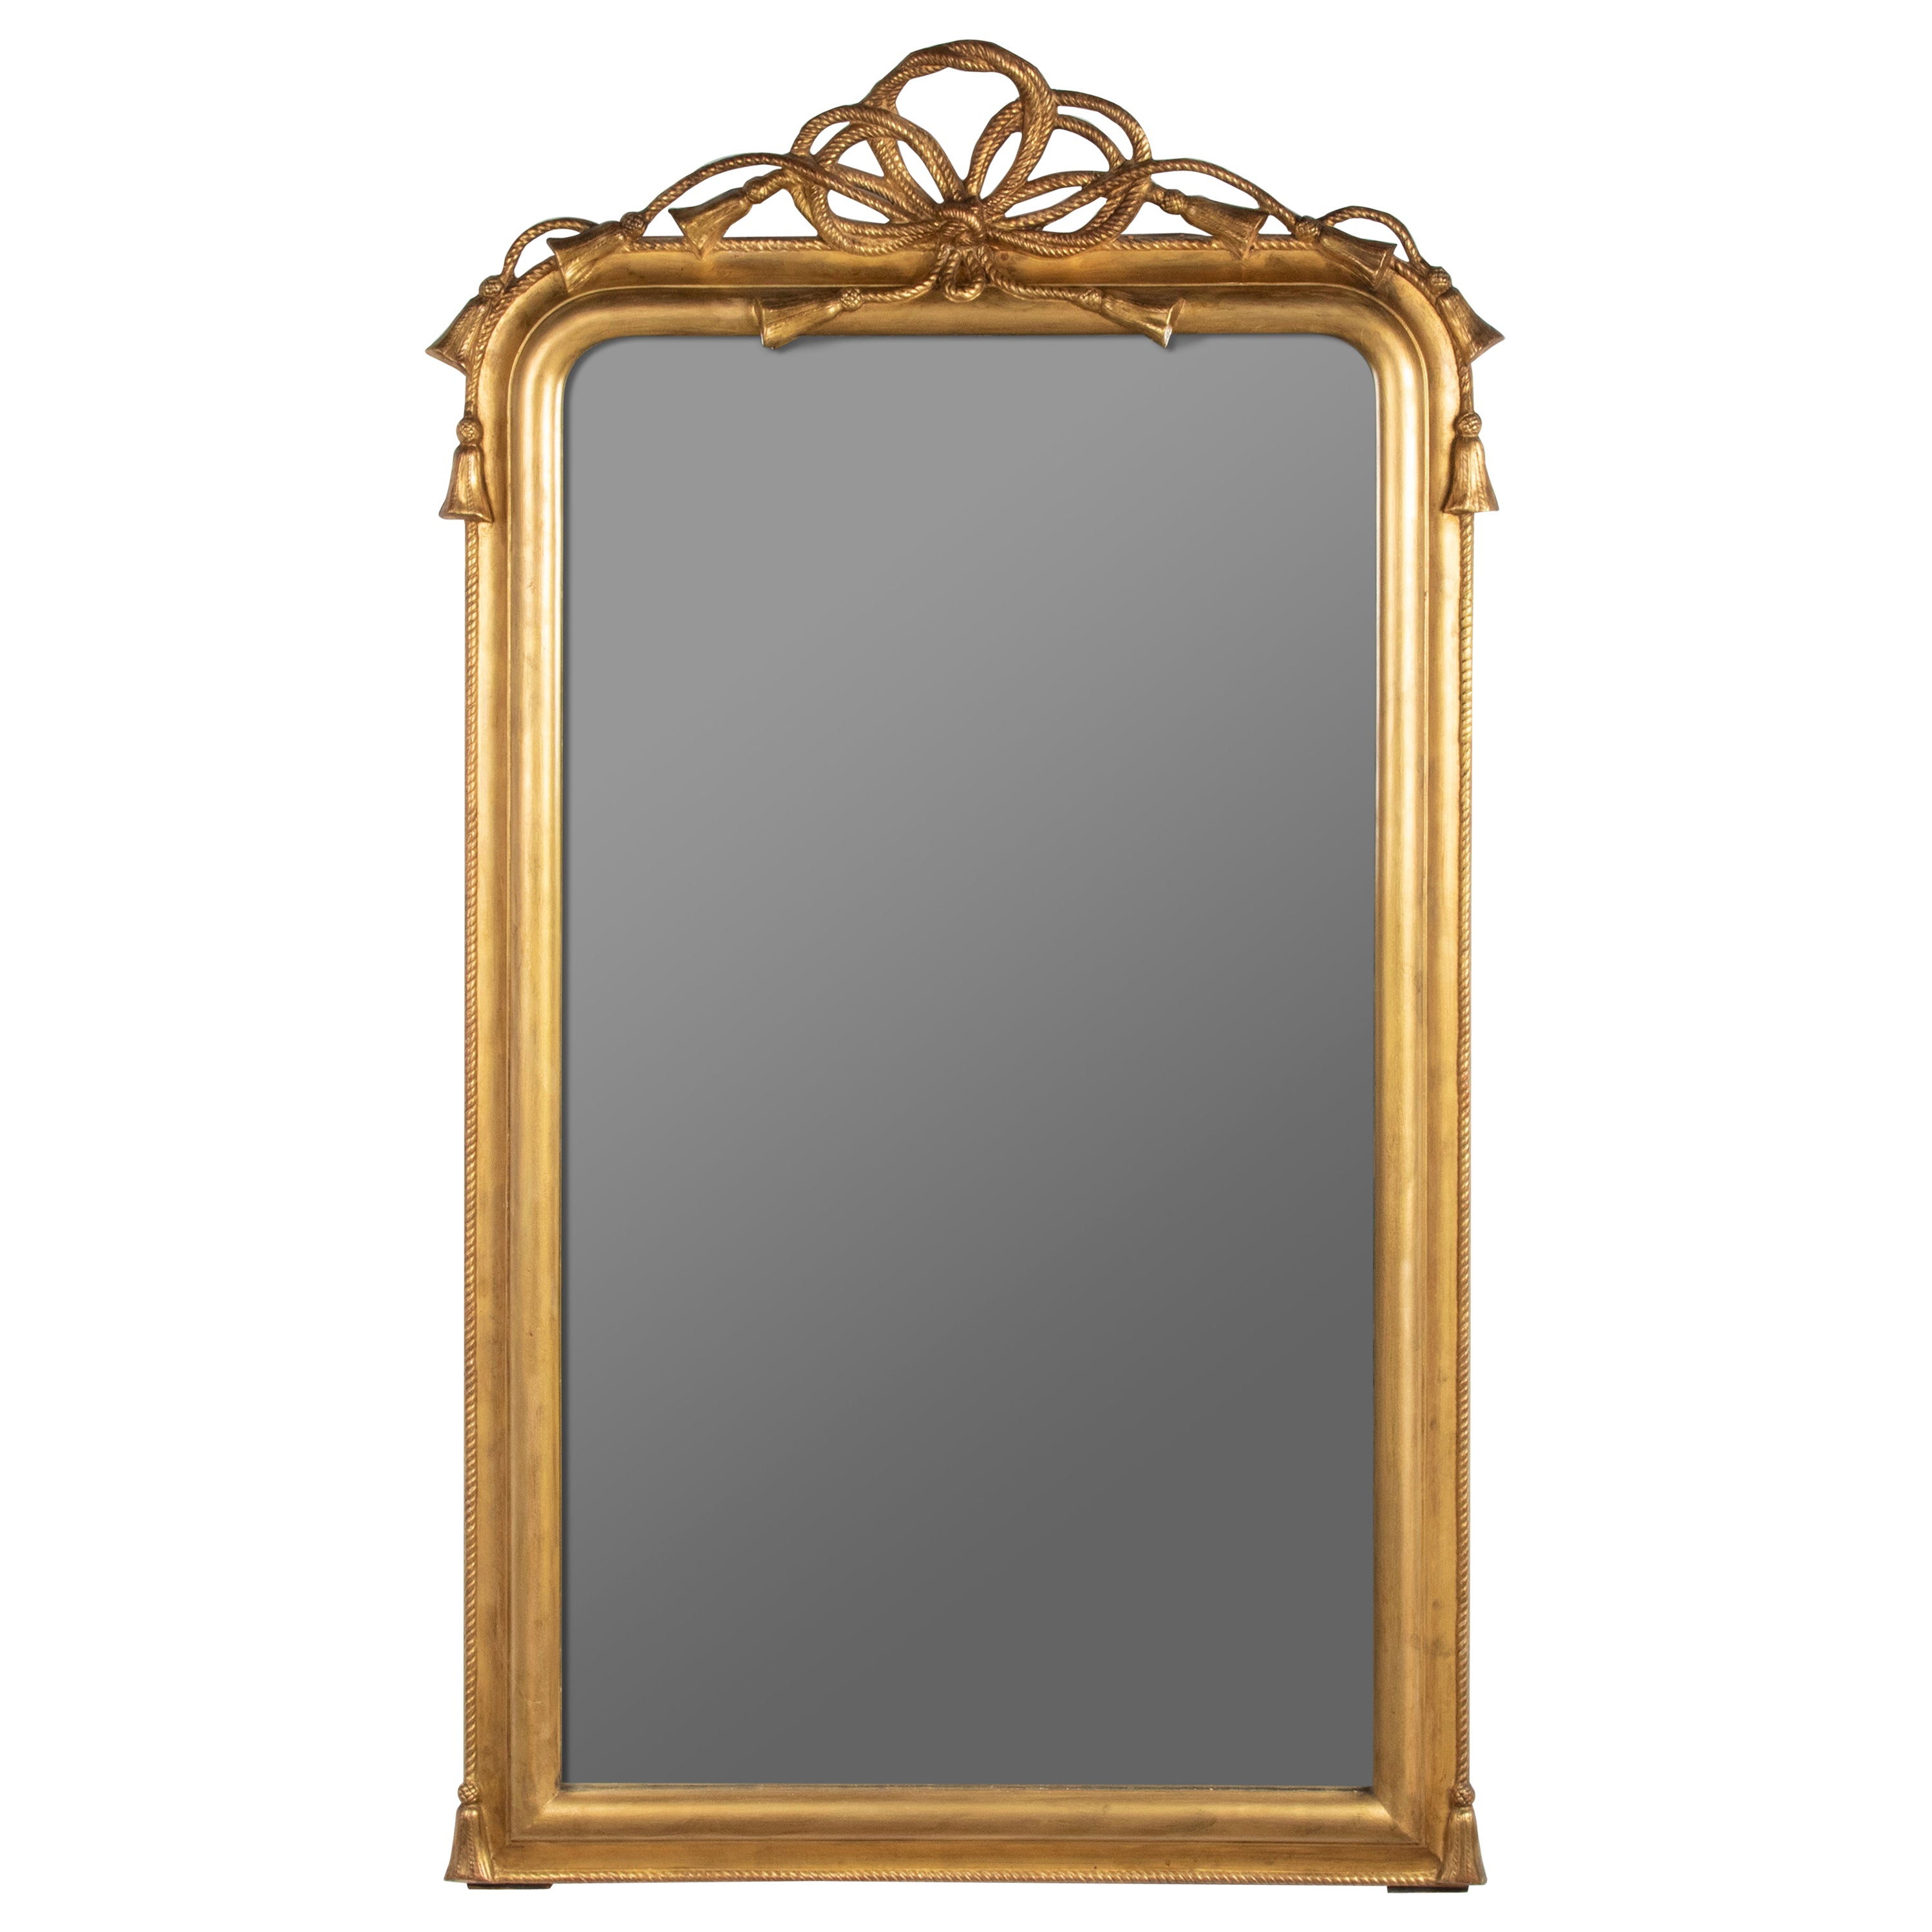 19th Century Napoleon III Gilded Wall Mirror with Rope and Tassels For Sale